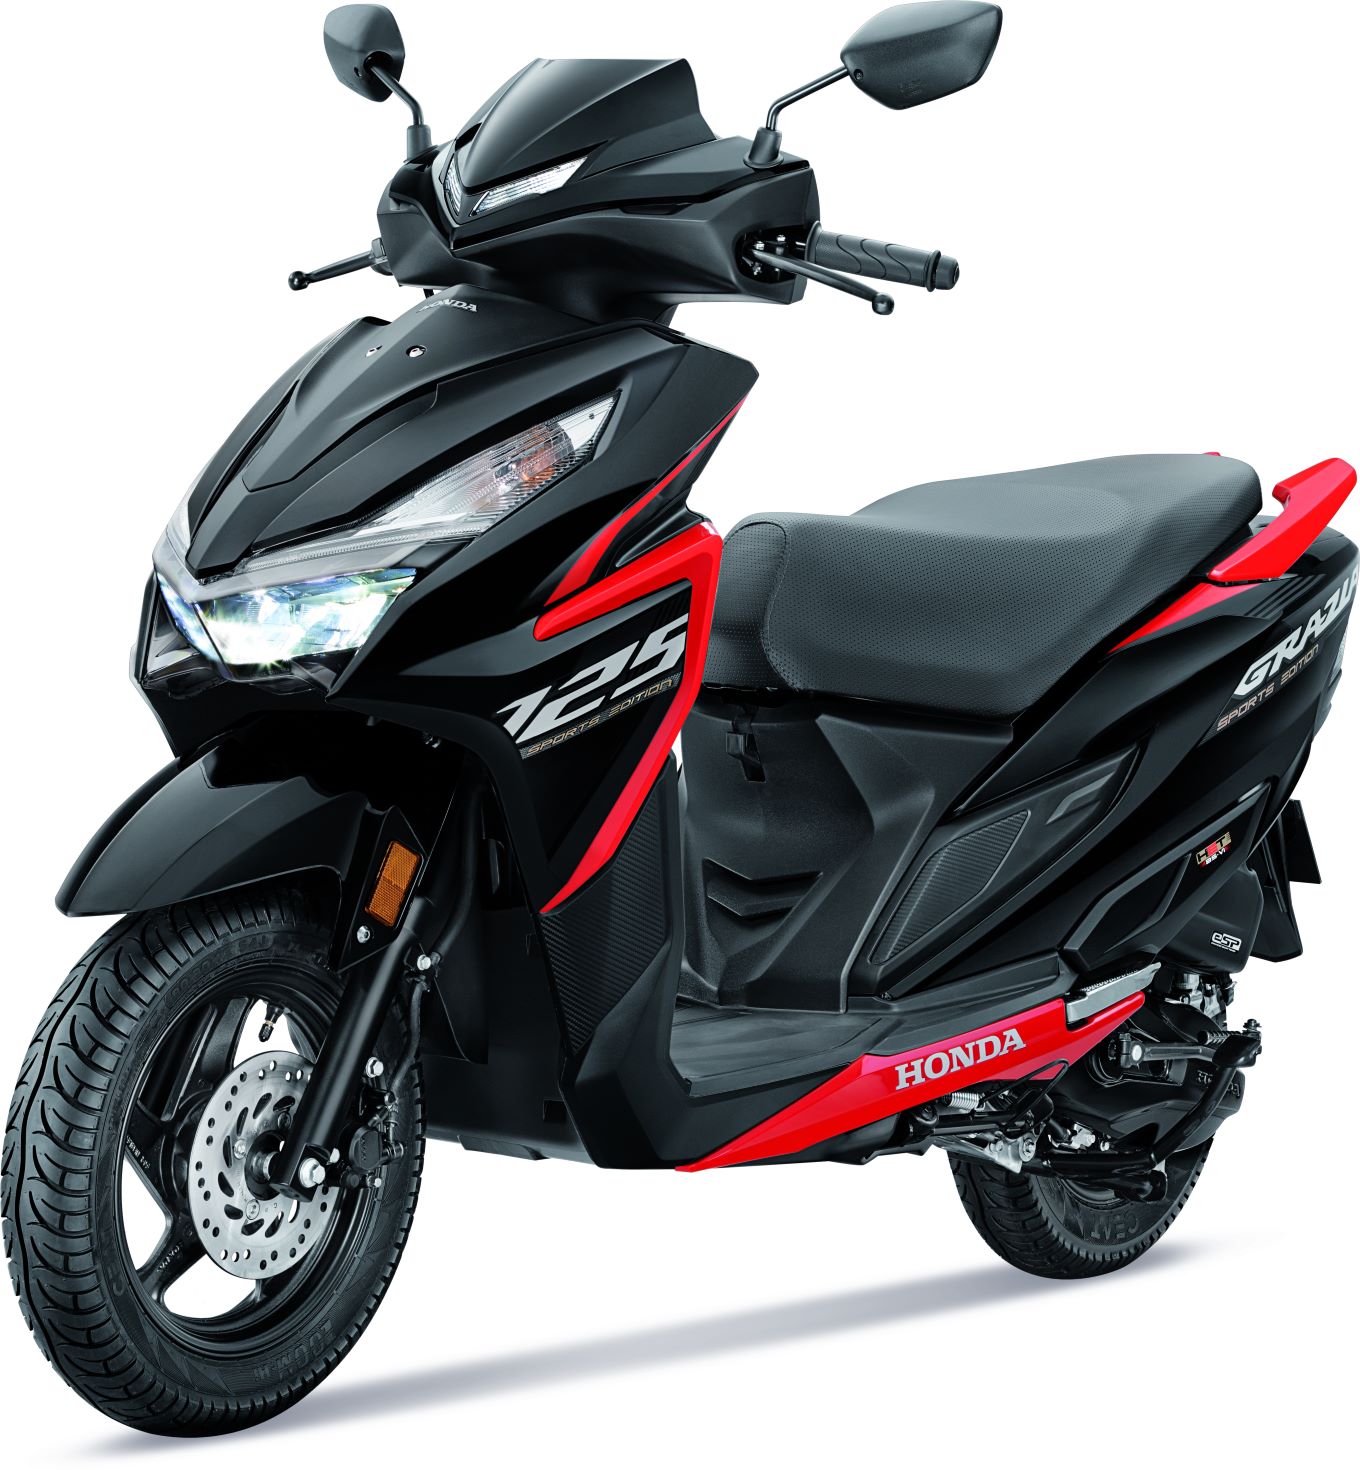 Honda Launches New Grazia Sports Edition At Rs. 82,564